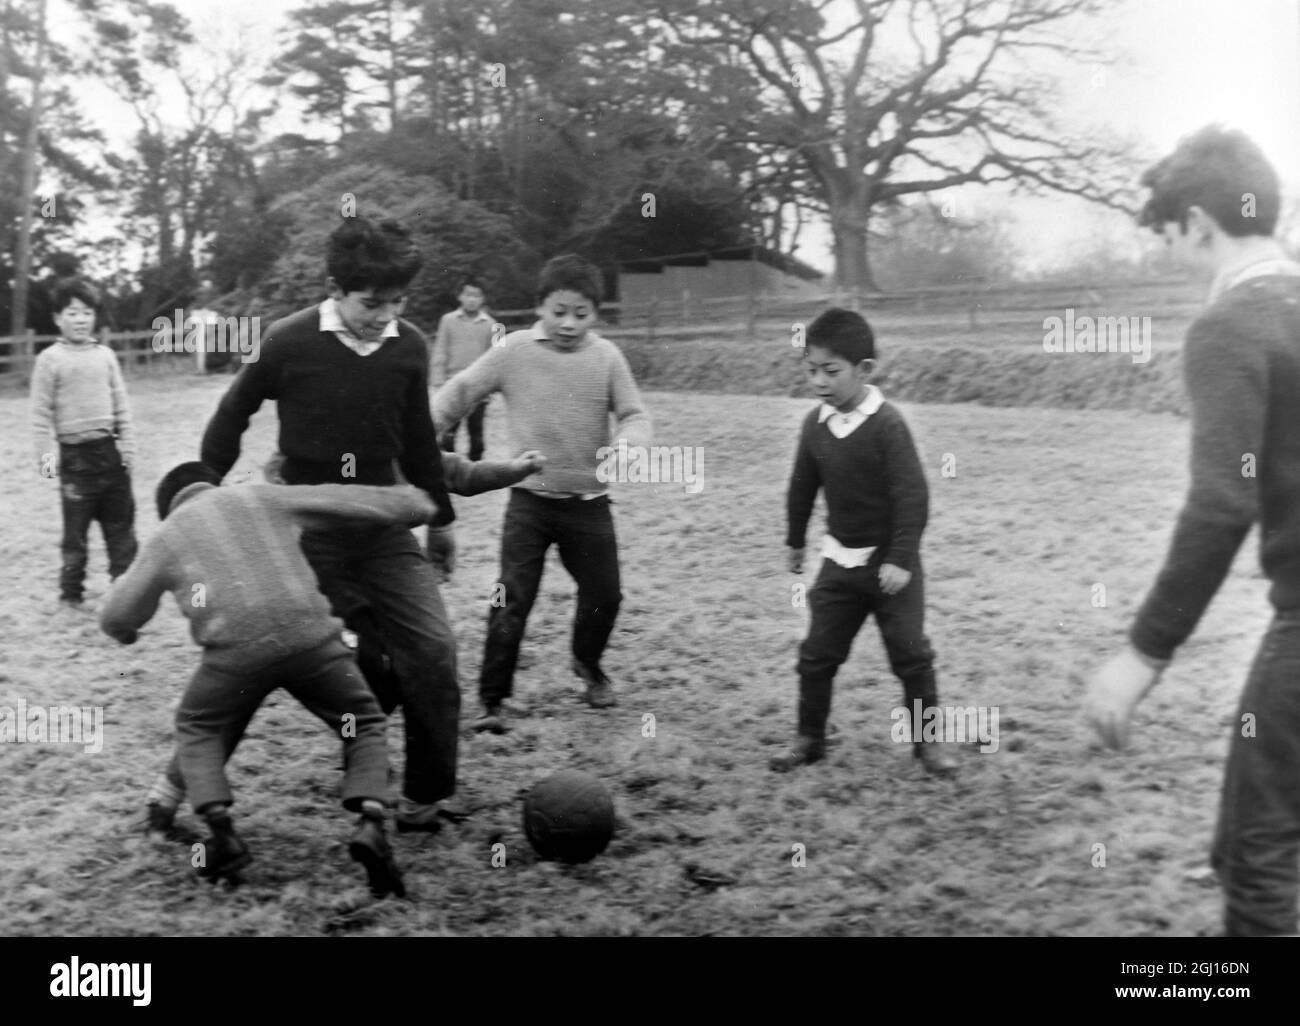 REFUGEES TIBETAN BOY PLAYS FOOTBALL IN SUSSEX ; 1 APRIL 1963 Stock Photo